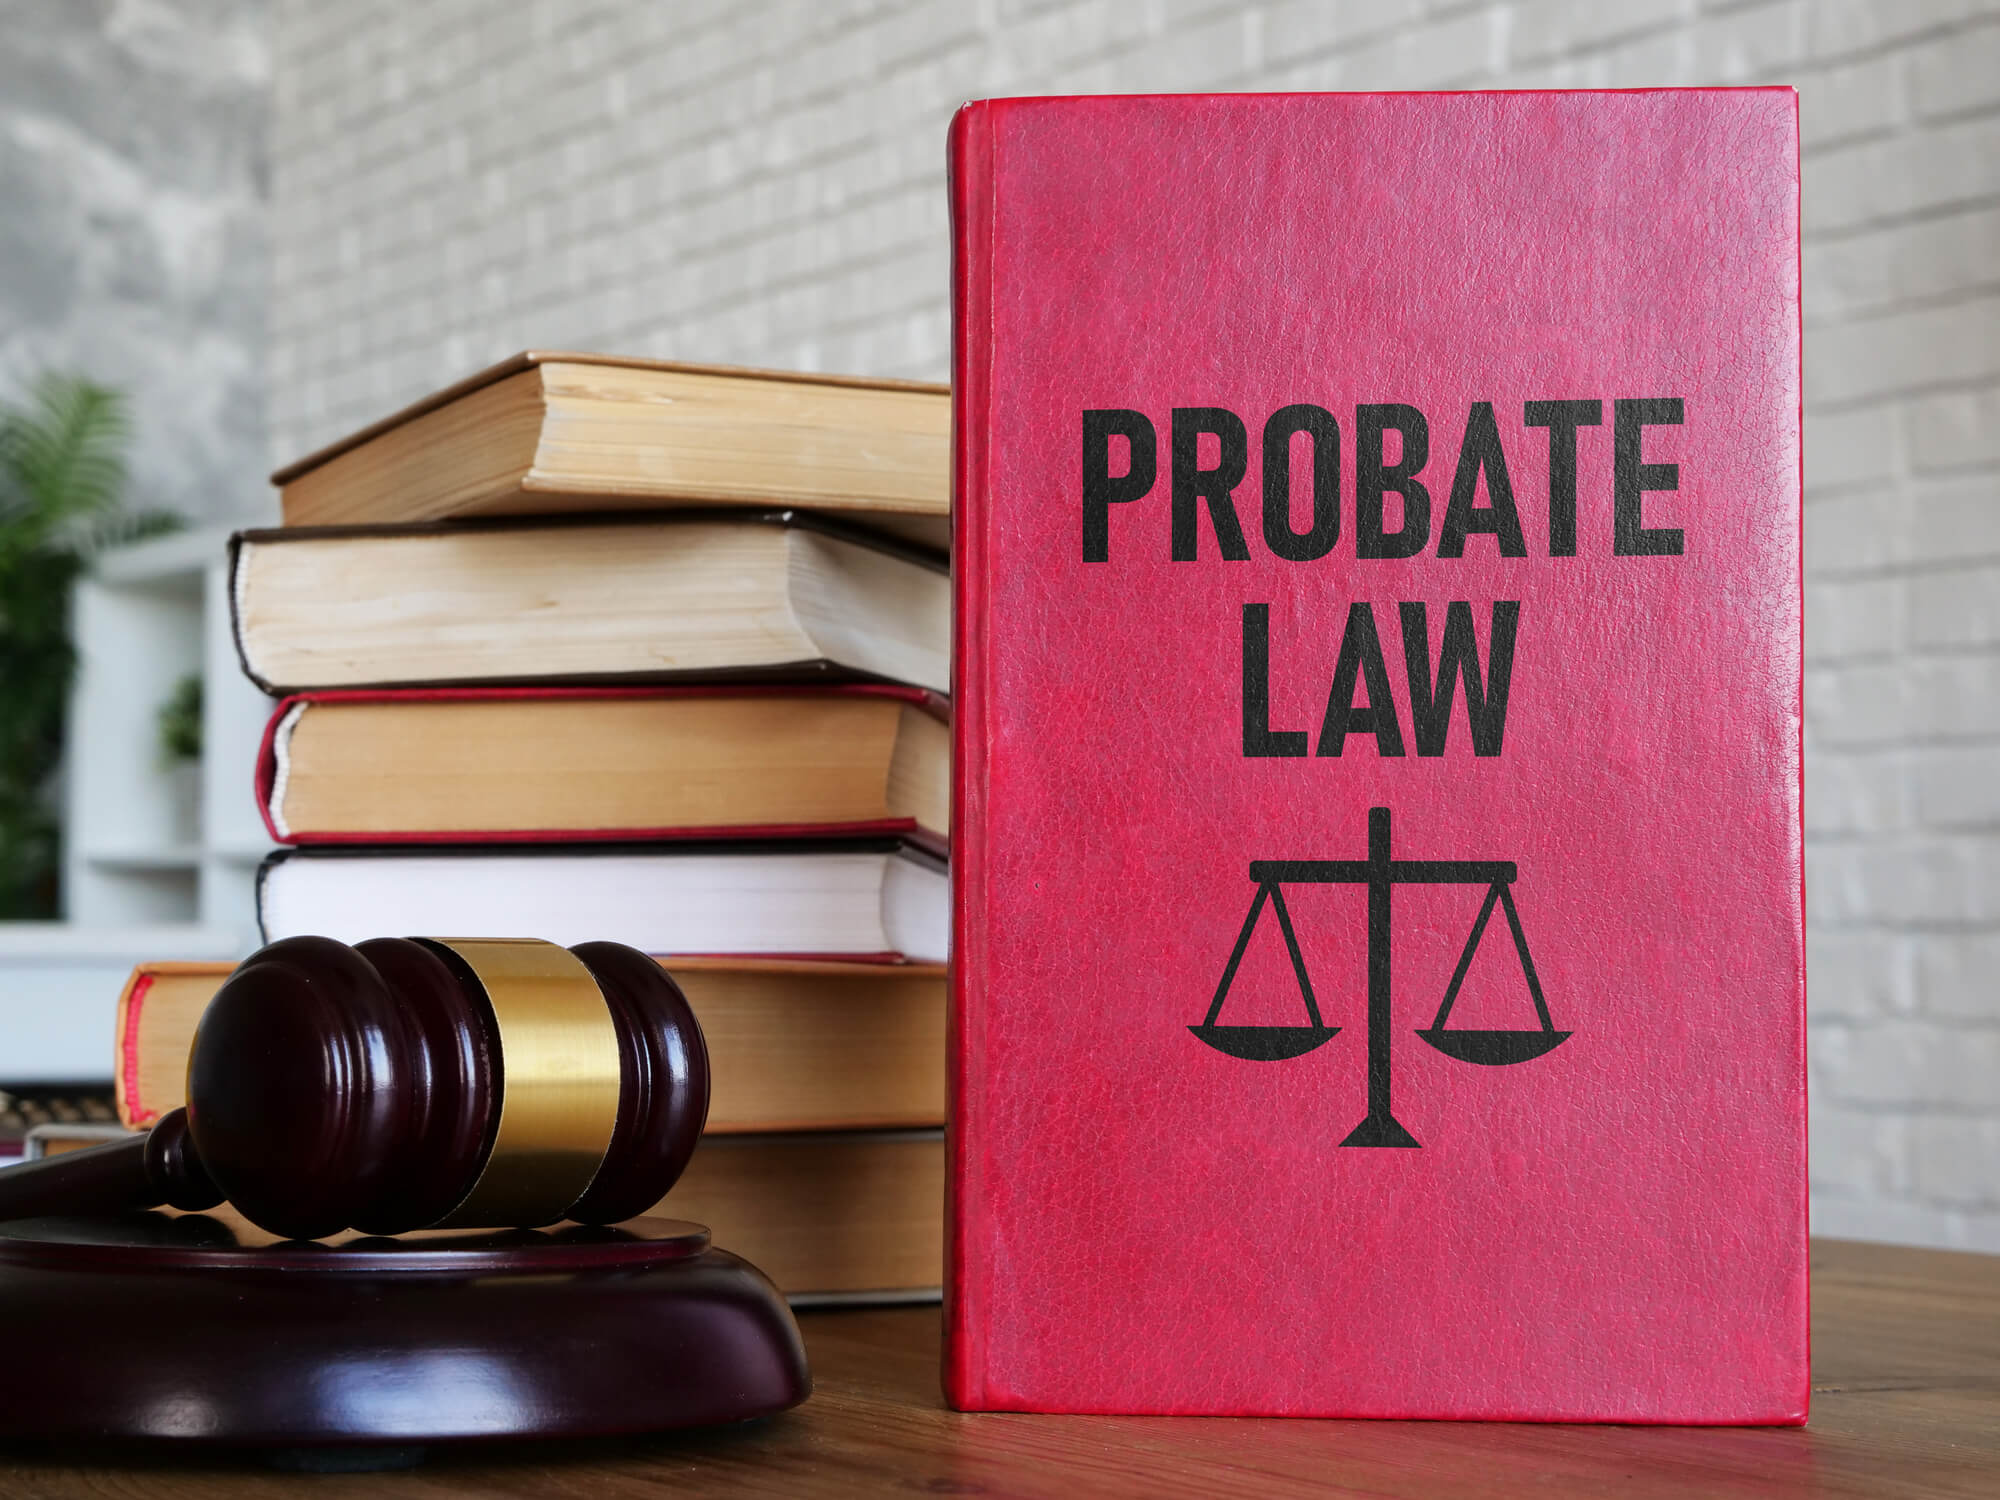 Red book of probate and gavel